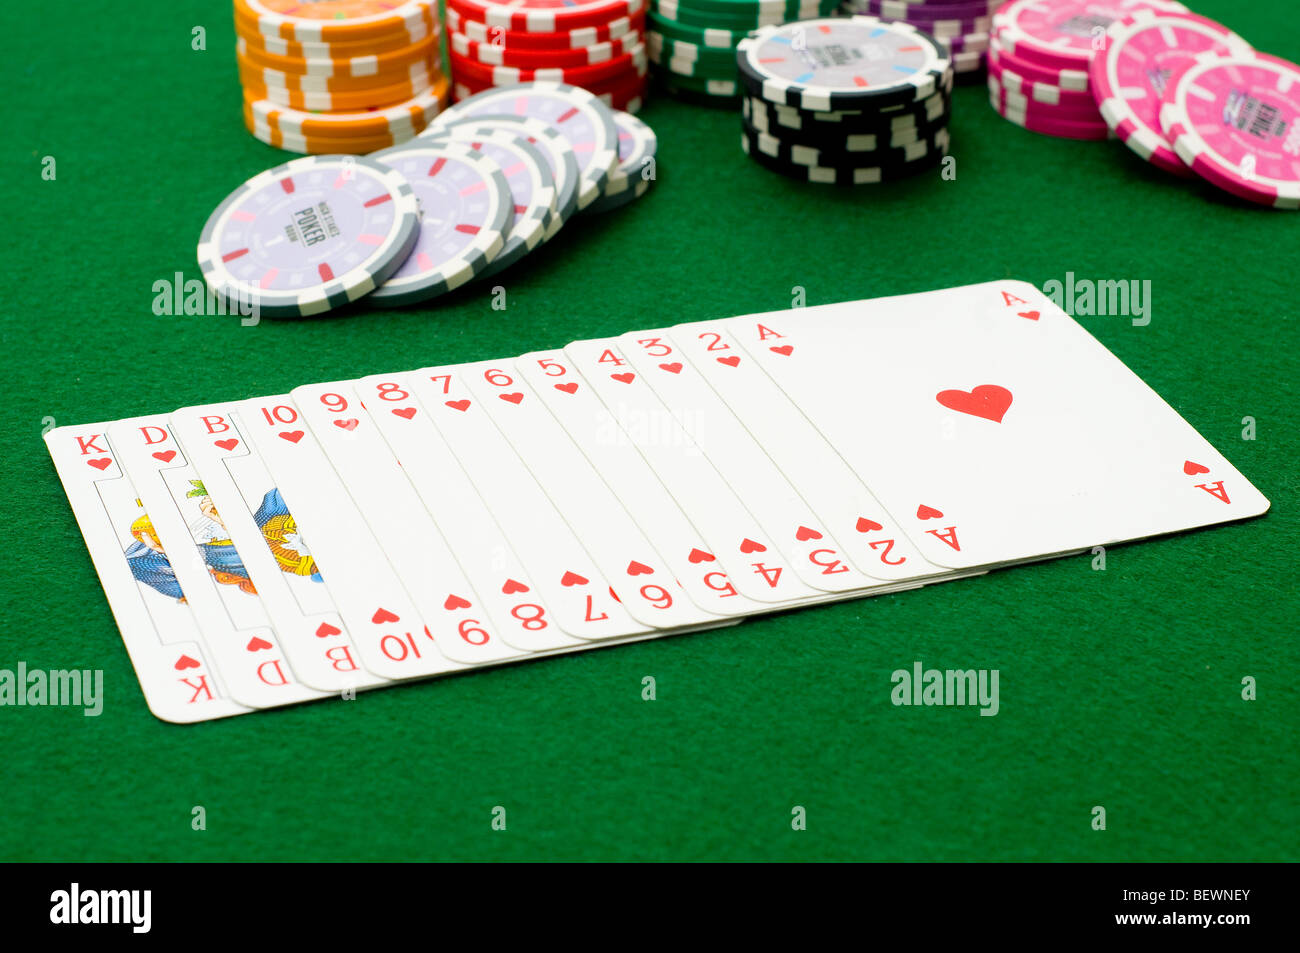 Poker play cards and fiches on the green table Stock Photo